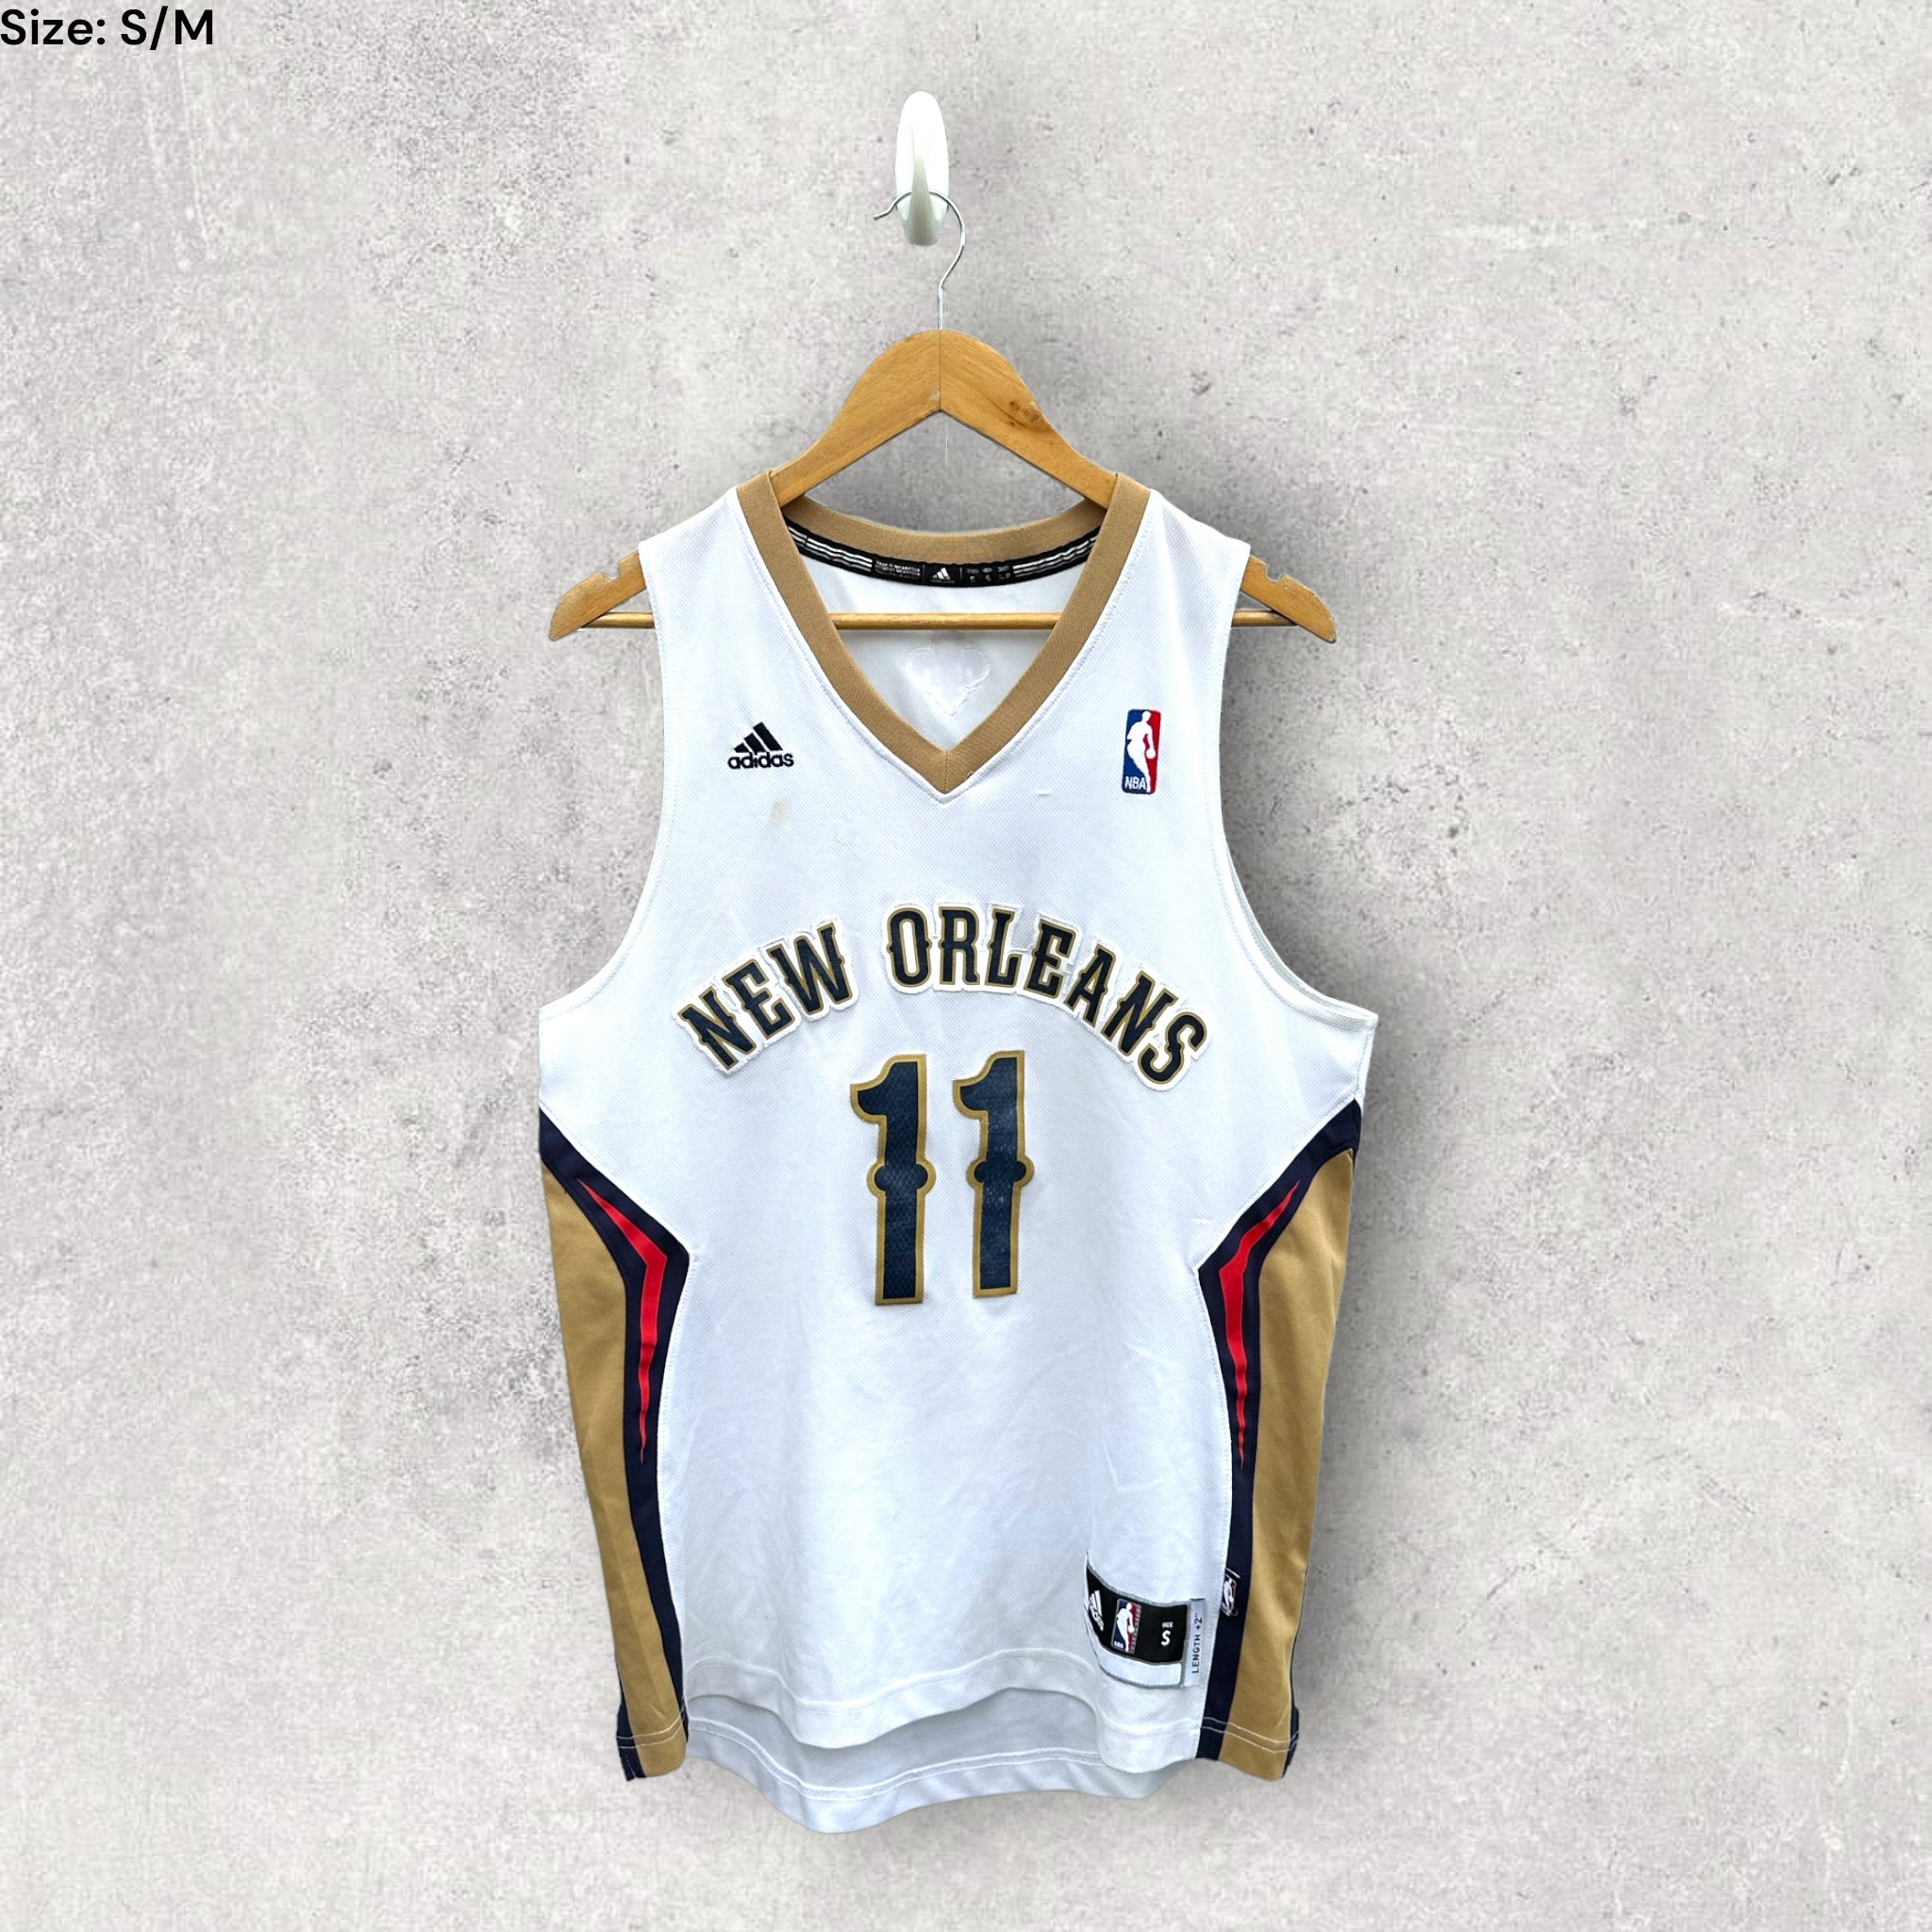 New Orleans Pelicans white jersey